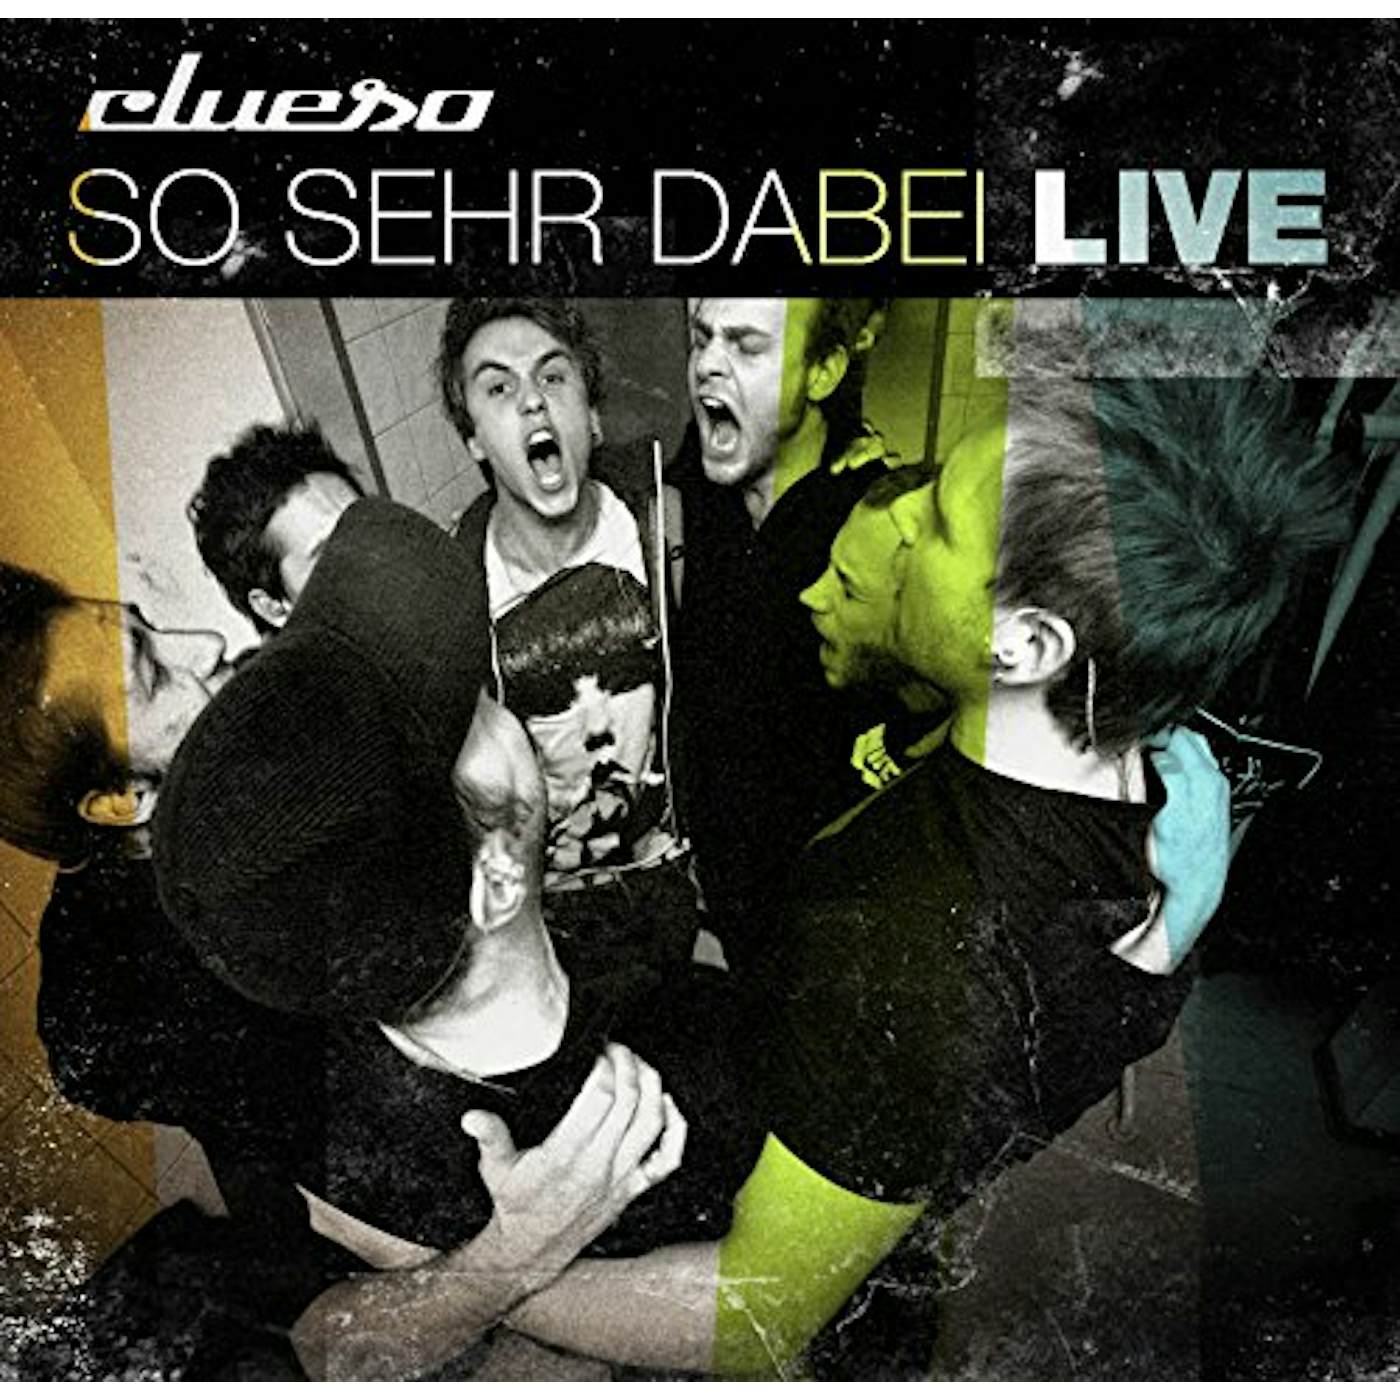 Clueso SO SEHR DABEI-LIVE CD